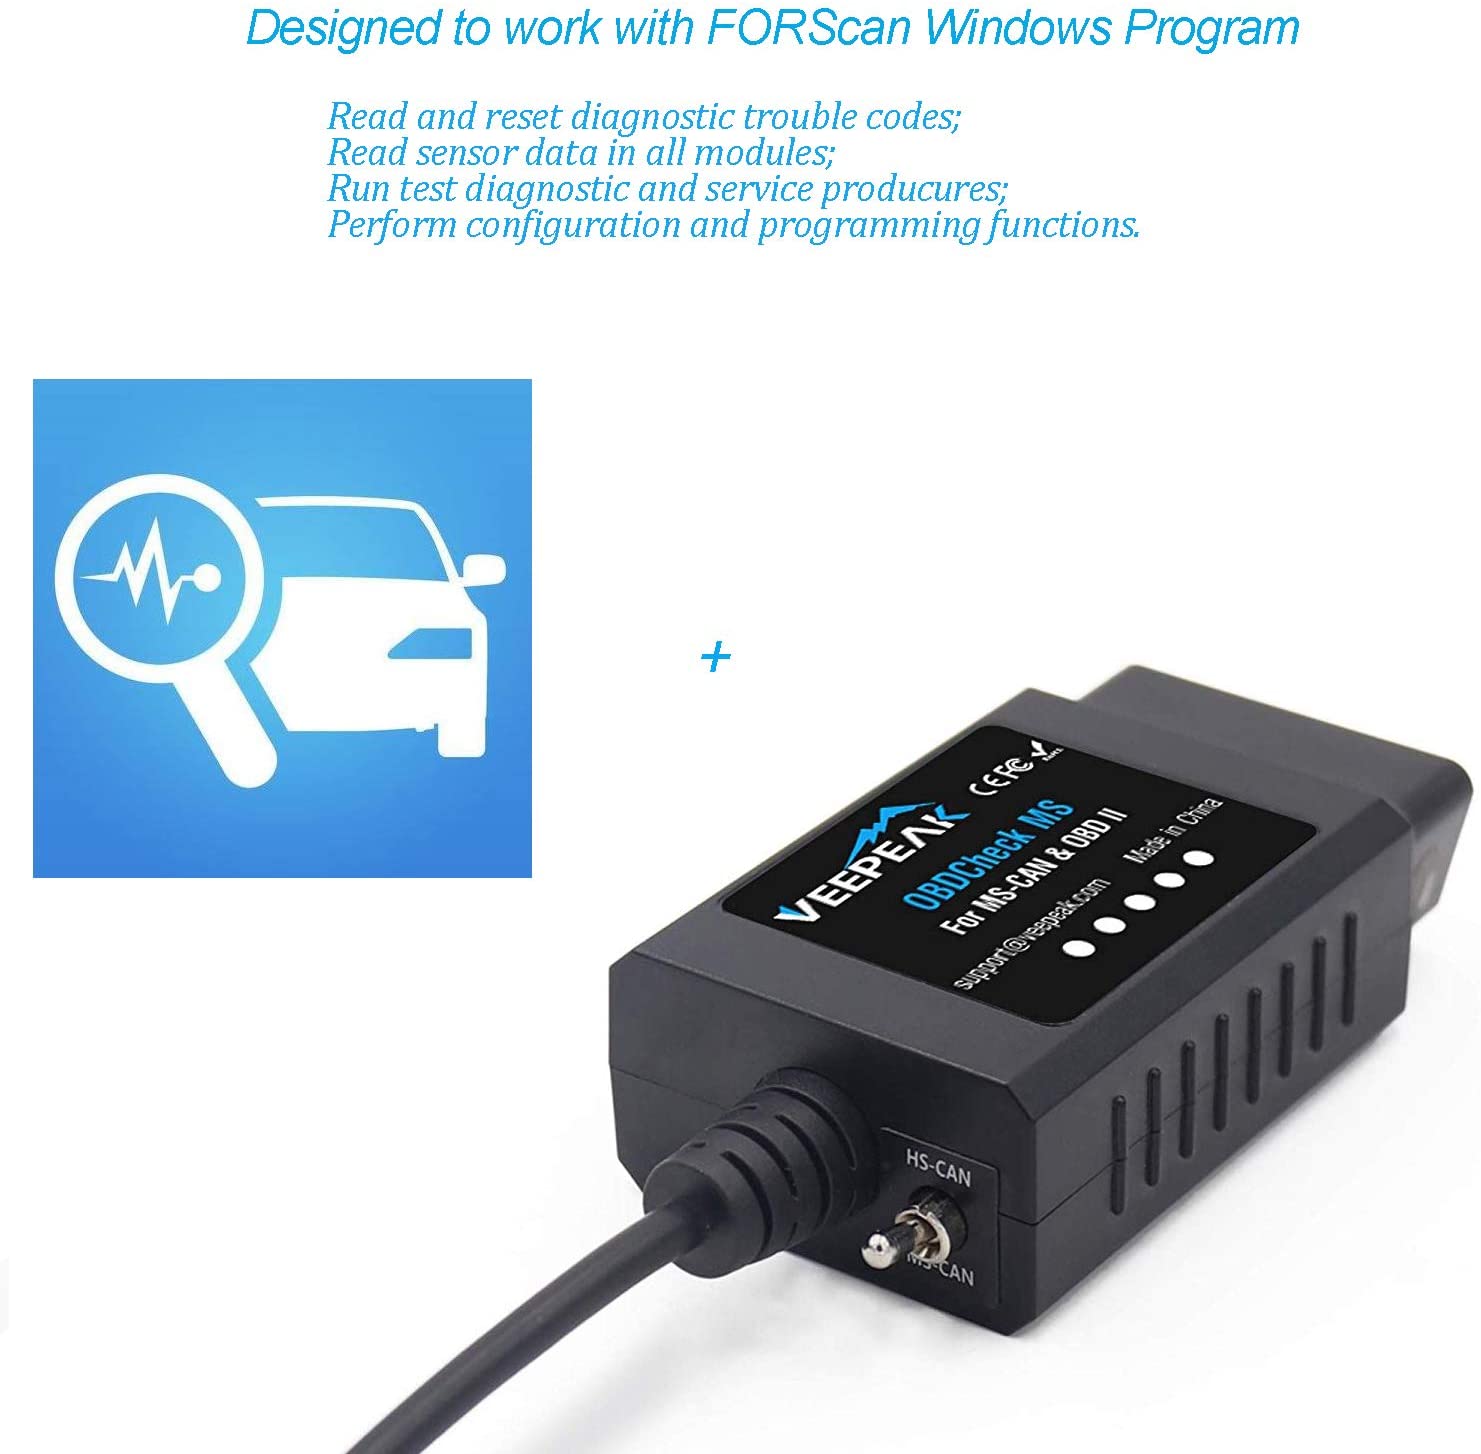 Veepeak USB OBD2 Adapter for FORScan Windows with HS-CAN MS-CAN Switch Professional Diagnostic Scan Coding Reset Tool for Ford Mazda Vehicles